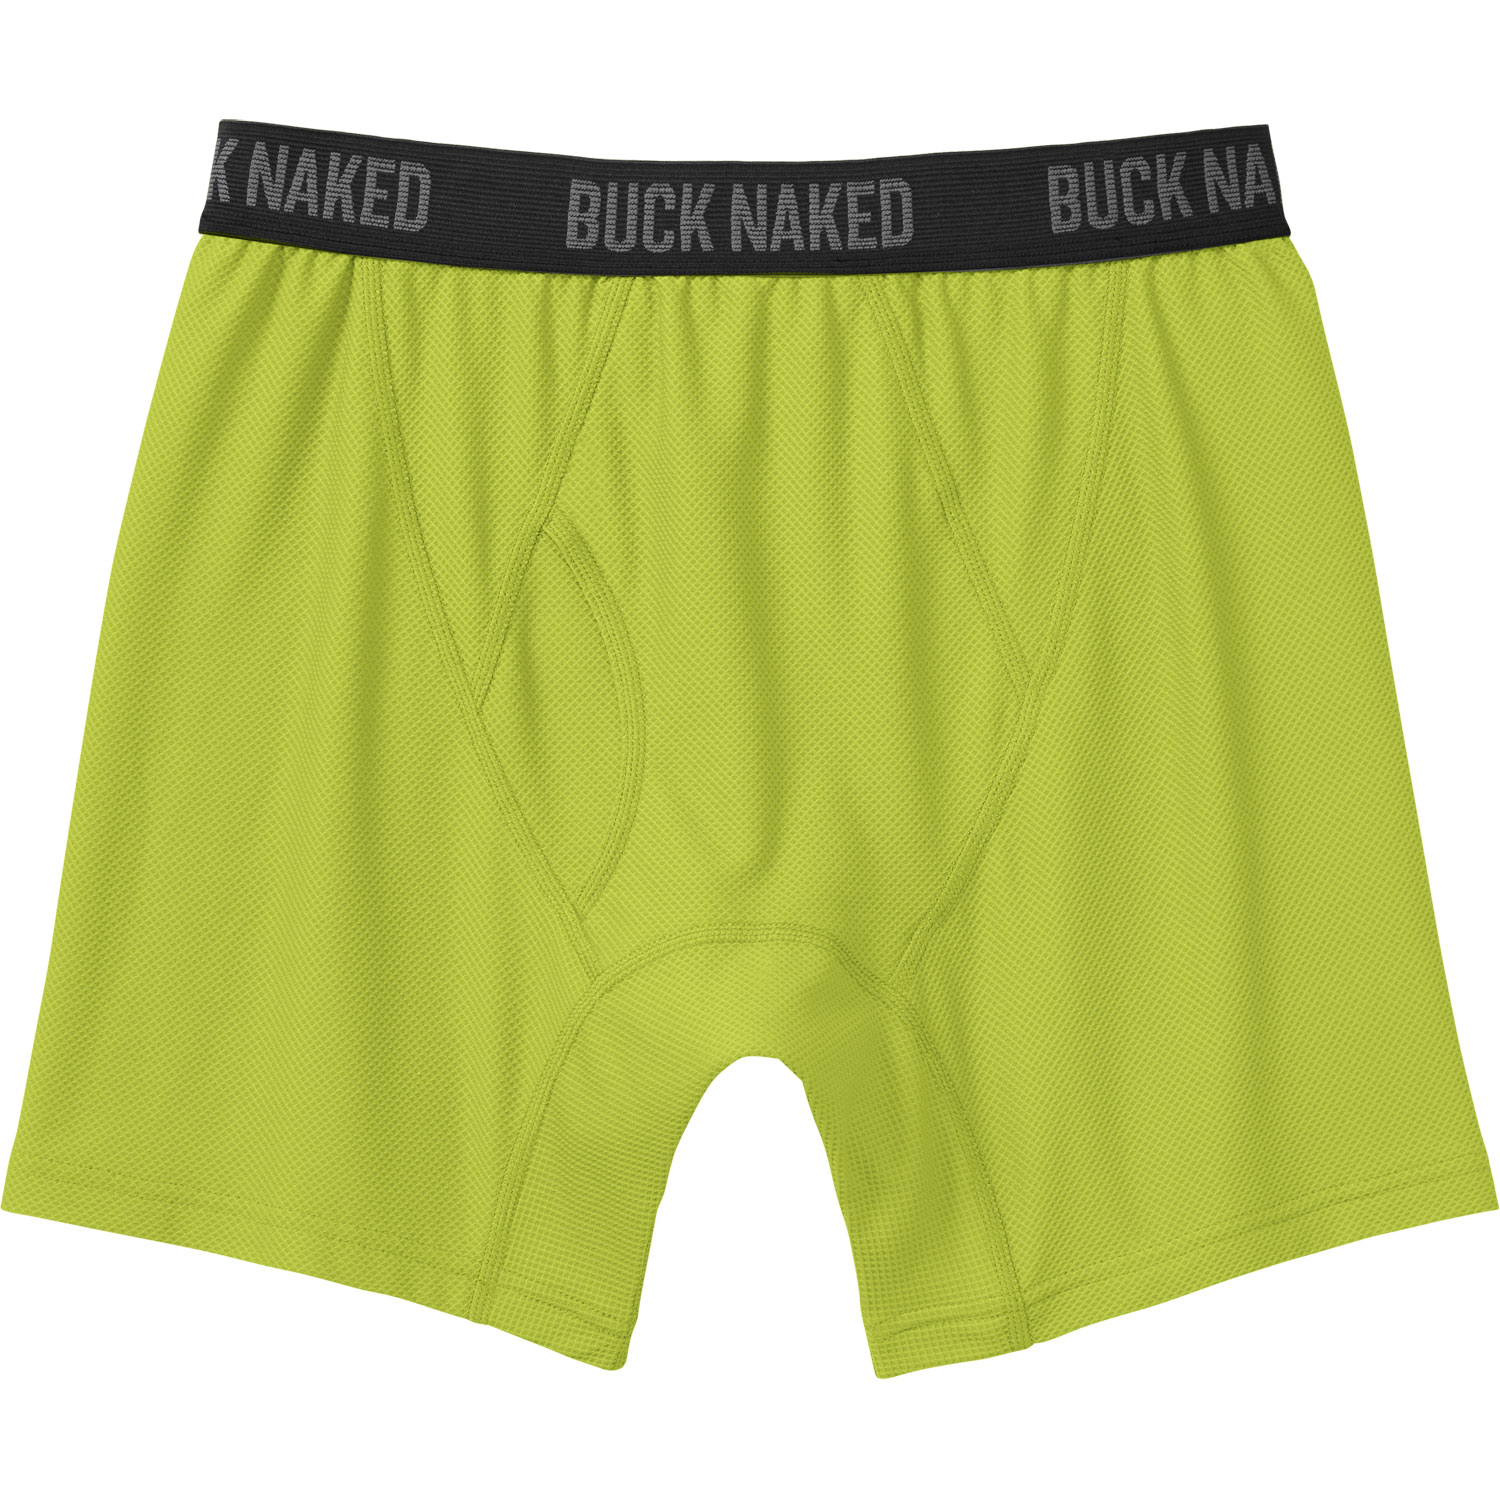 Duluth Trading Company BUCK NAKED Boxer Briefs Review, by Datapotomus